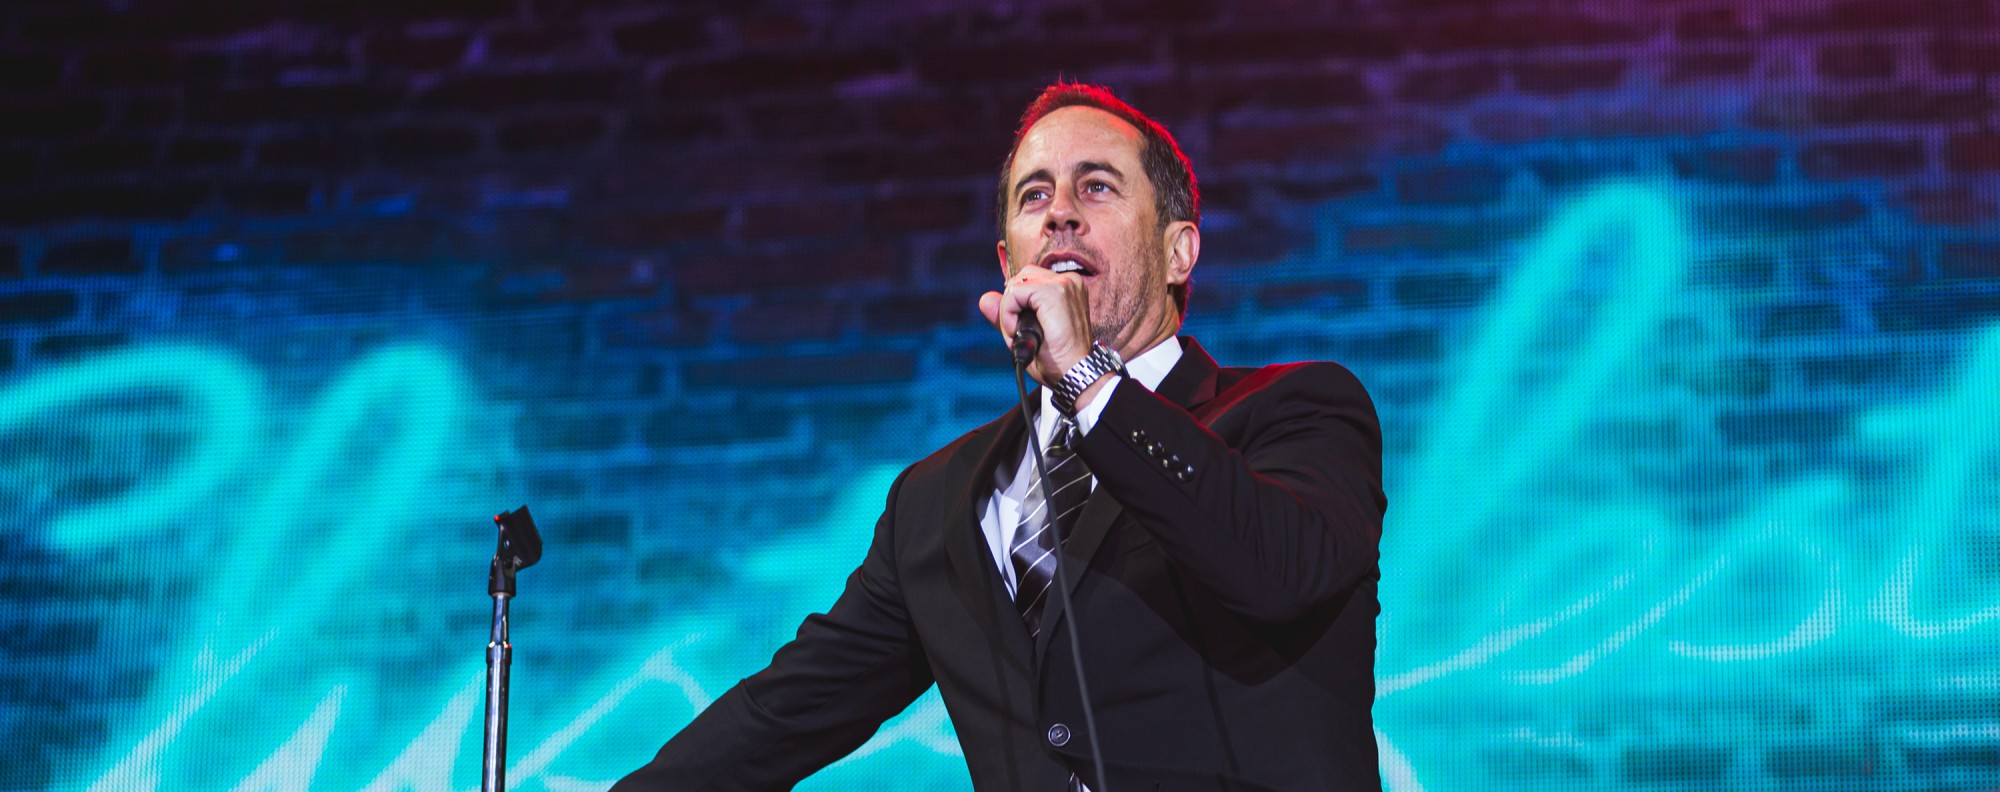 Jerry Seinfeld is seen on stage in San Francisco, California, at Clusterfest in 2019. Photo: Shutterstock